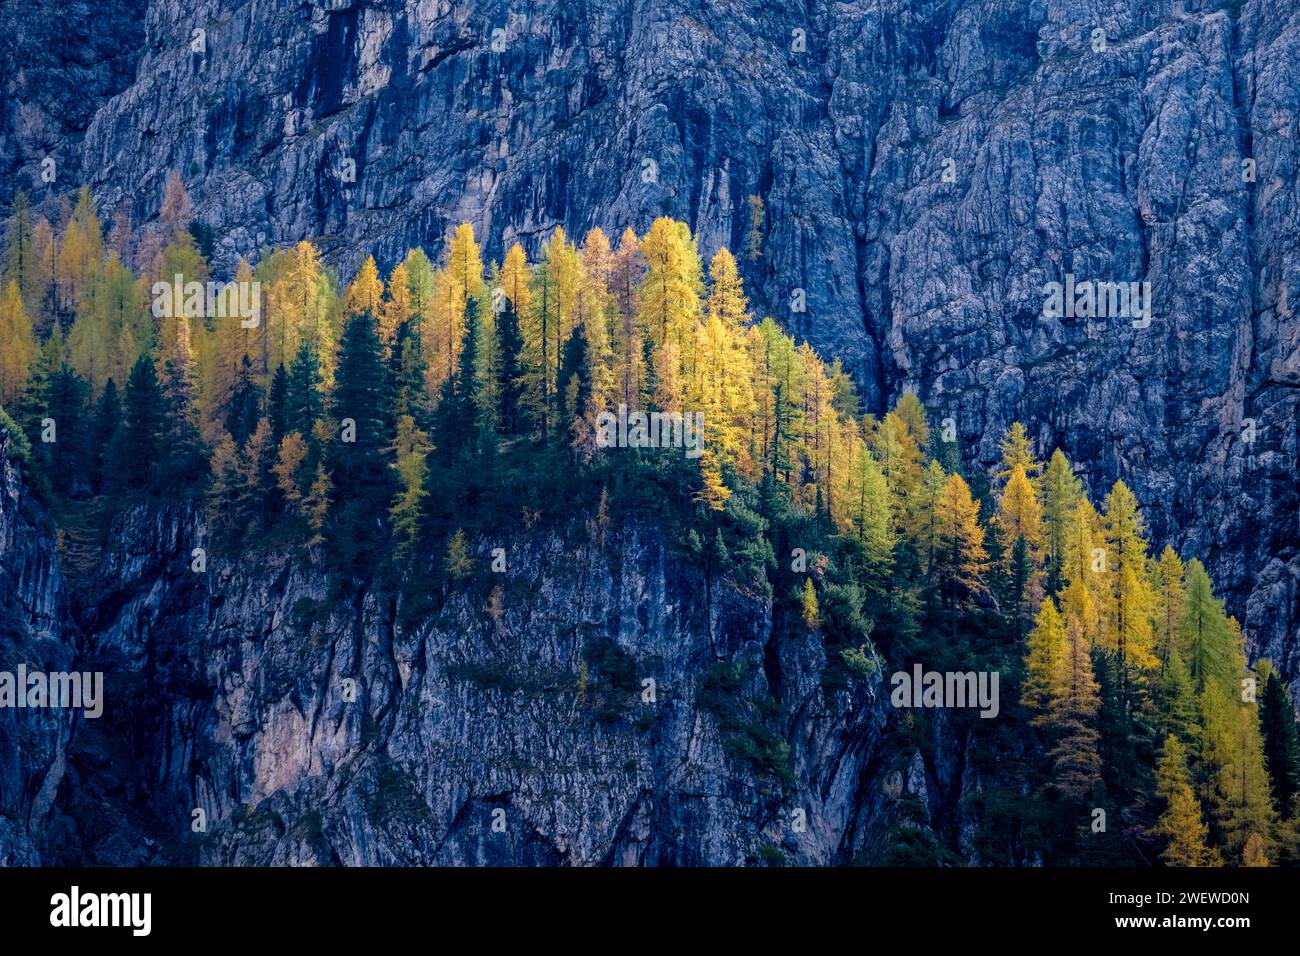 Colourful larch and pine trees growing on a rocky ledge of the Sella massif below Gardena Pass in autumn. Stock Photo